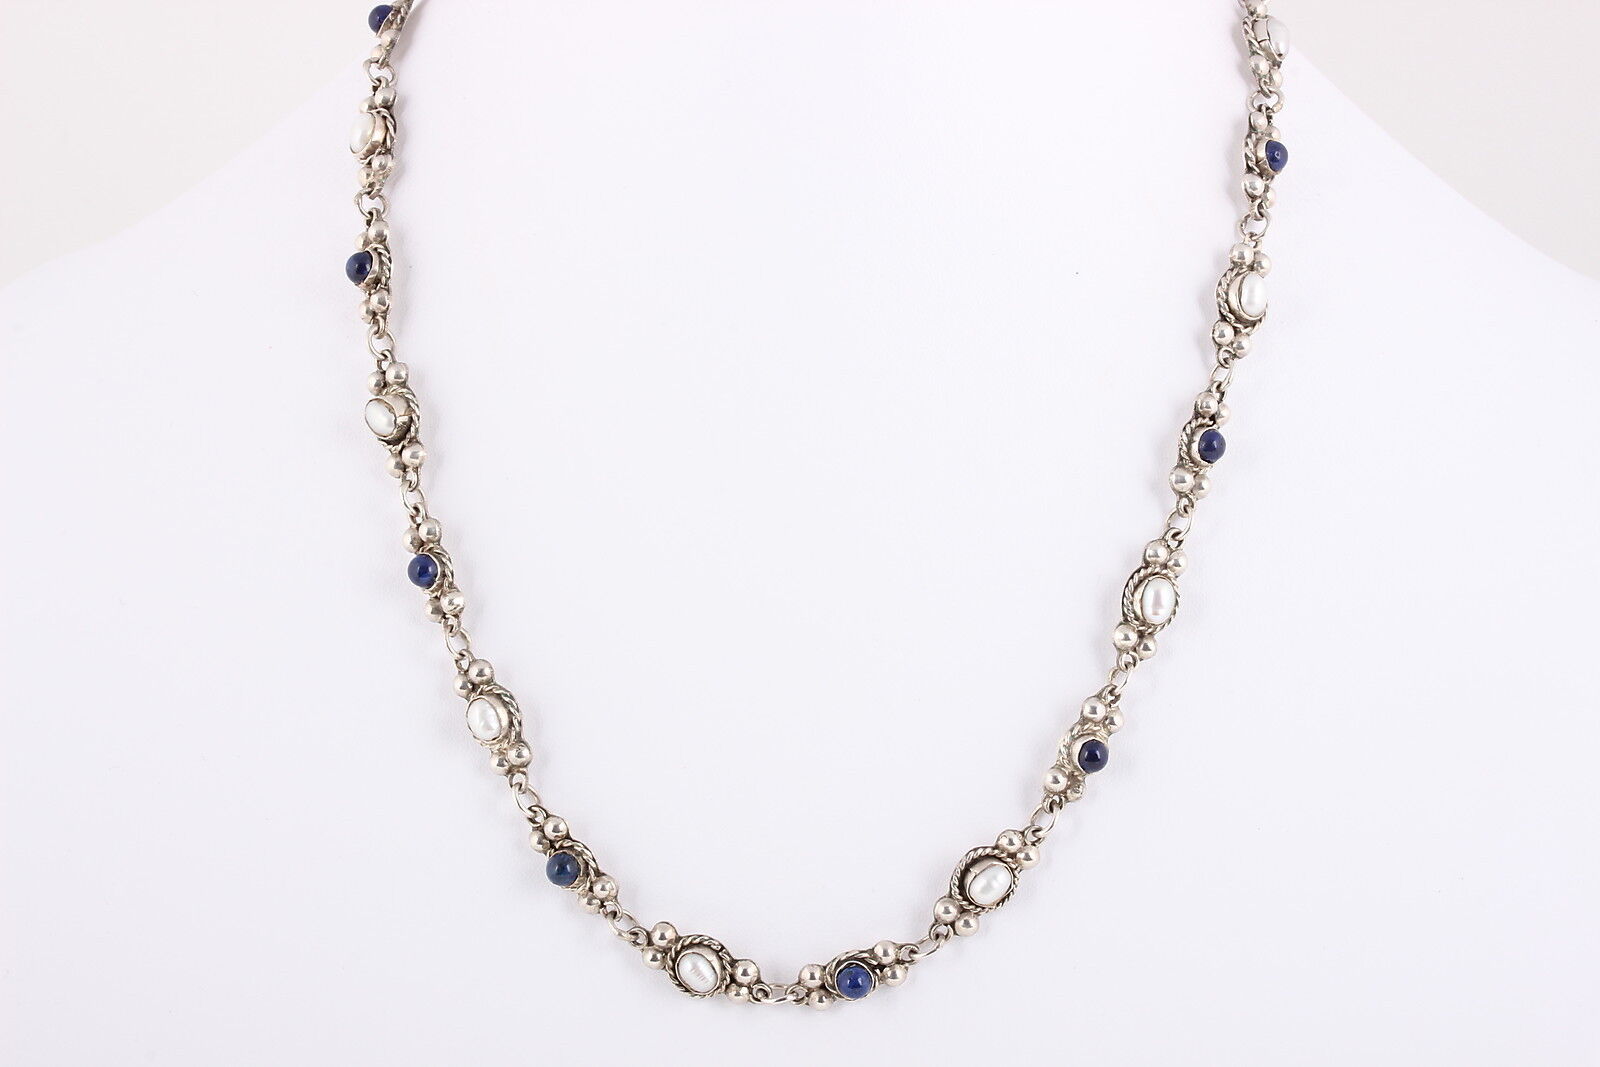 CREAMY PEARLS & BLUE STONE STERLING SILVER NECKLACE VINTAGE 5163